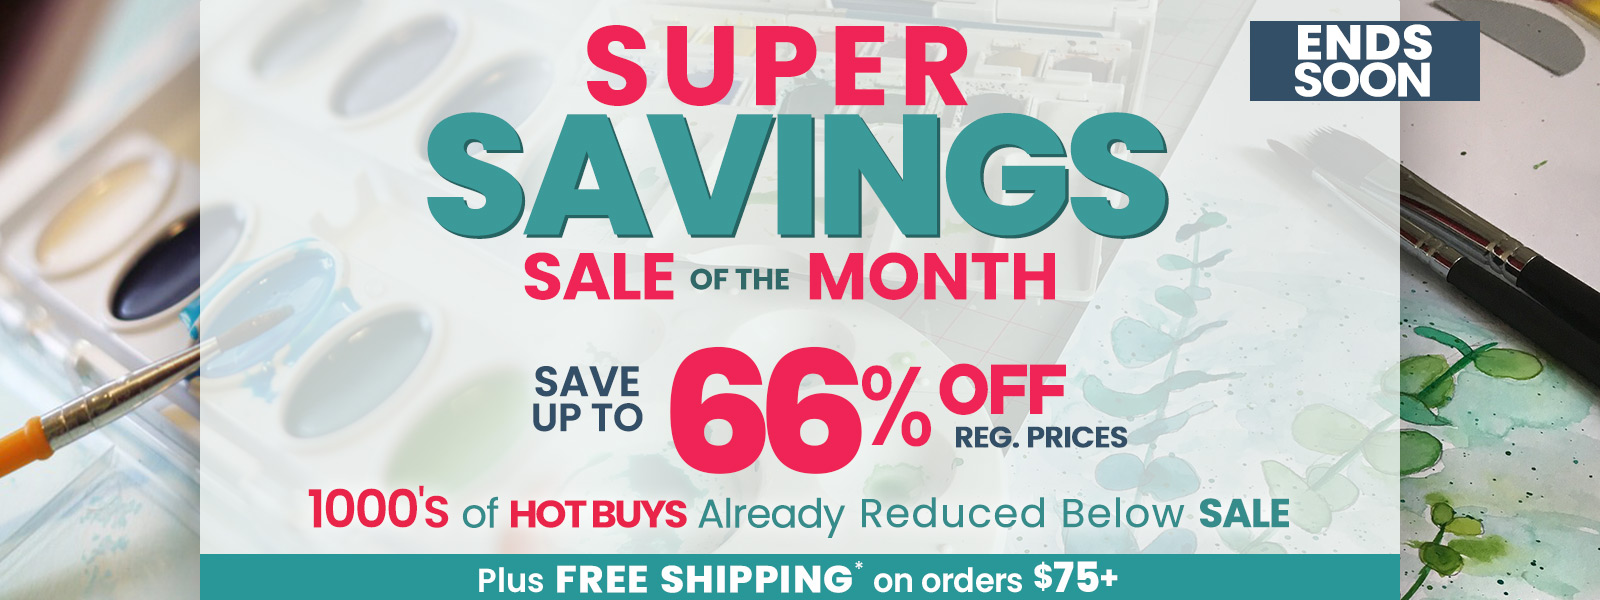 Super Savings Sale of the Month Plus Free Shipping